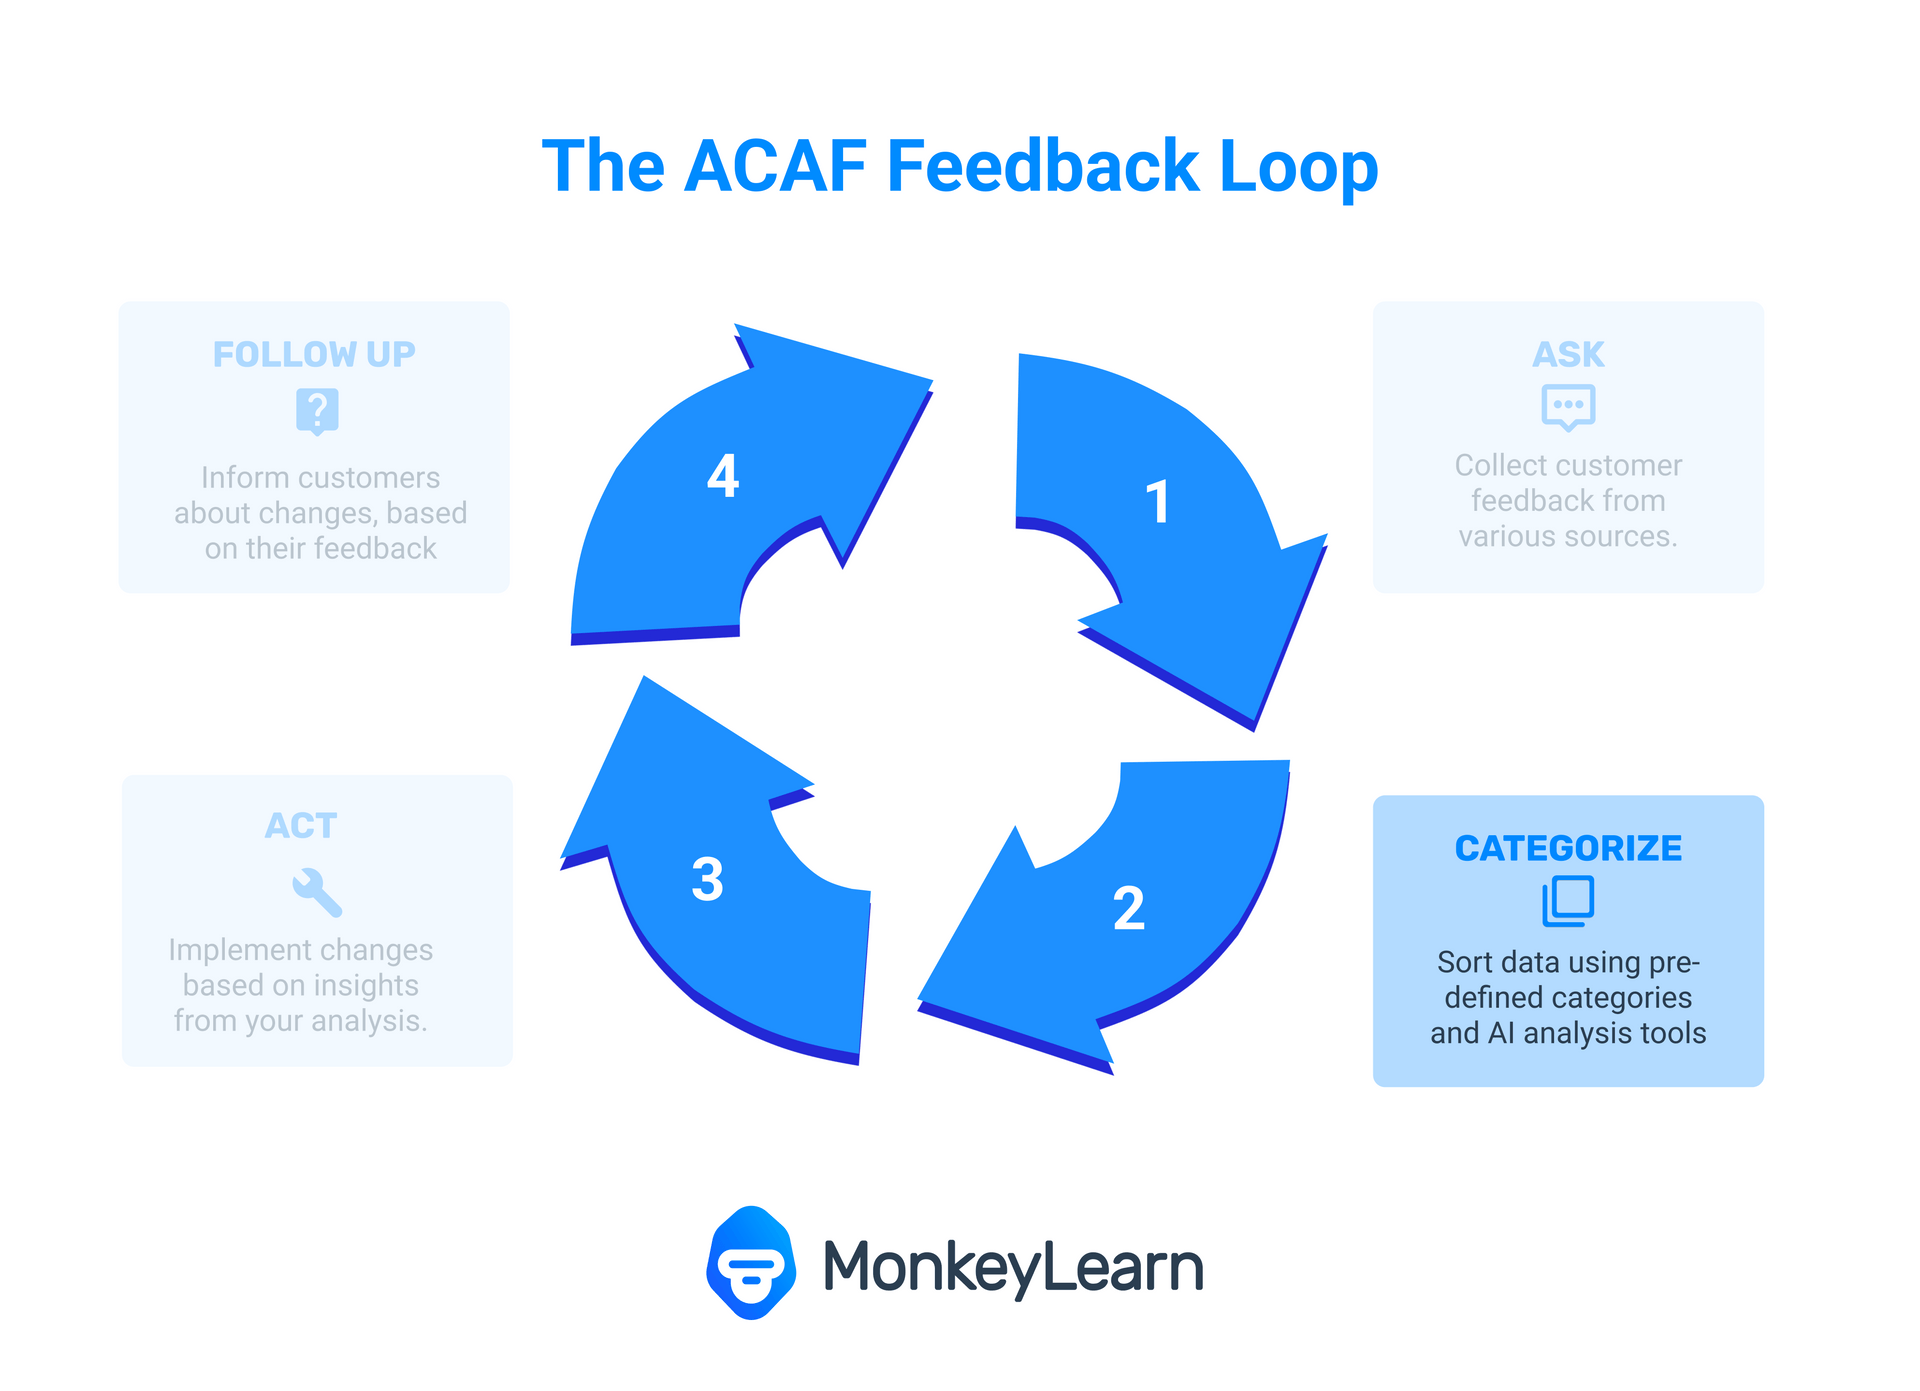 The ACAF Feedback loop depicted in four steps forming a circle: 'Ask' 'Categorize' 'Act' and 'Follow-Up'